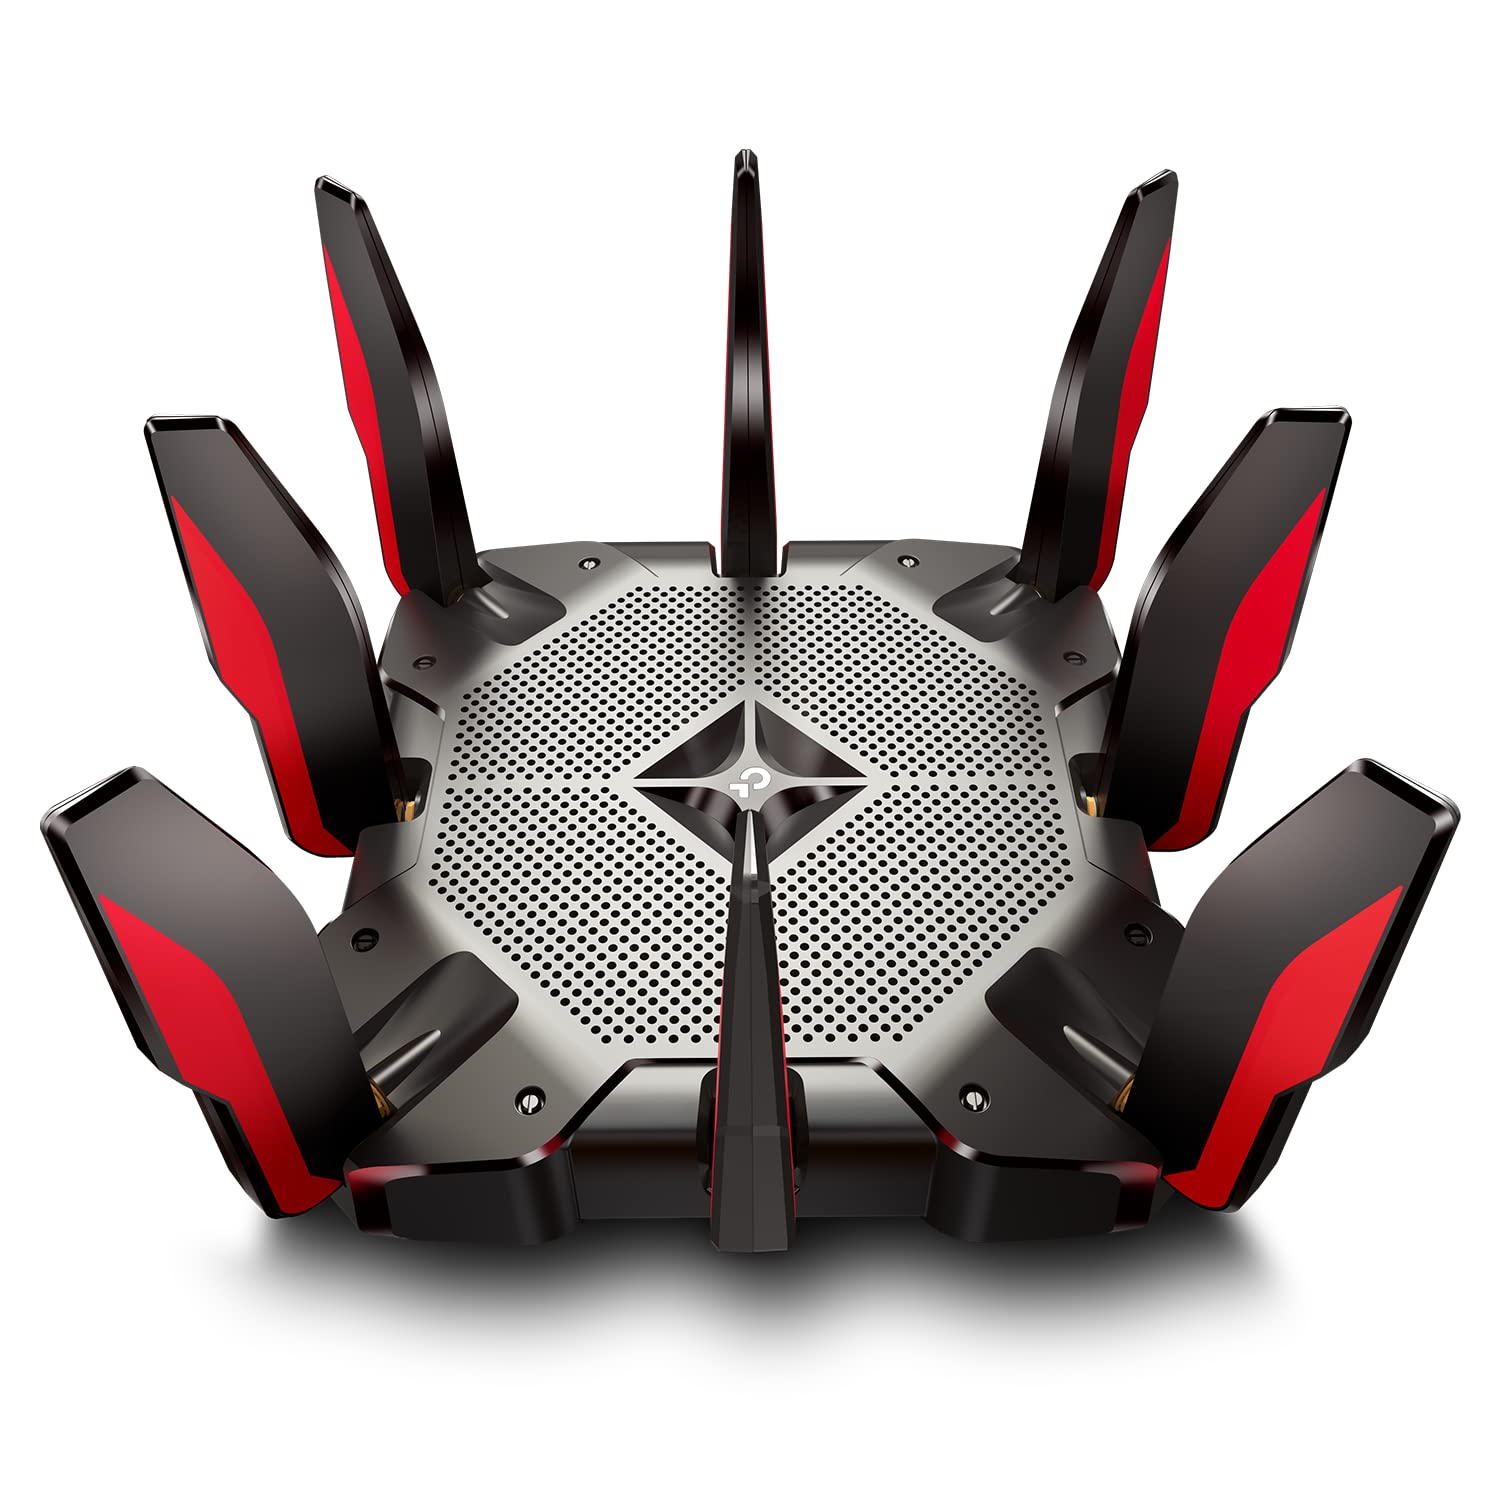 TP-Link WiFi 6 Gaming Router (Archer AX10000) $280 at Amazon $279.99